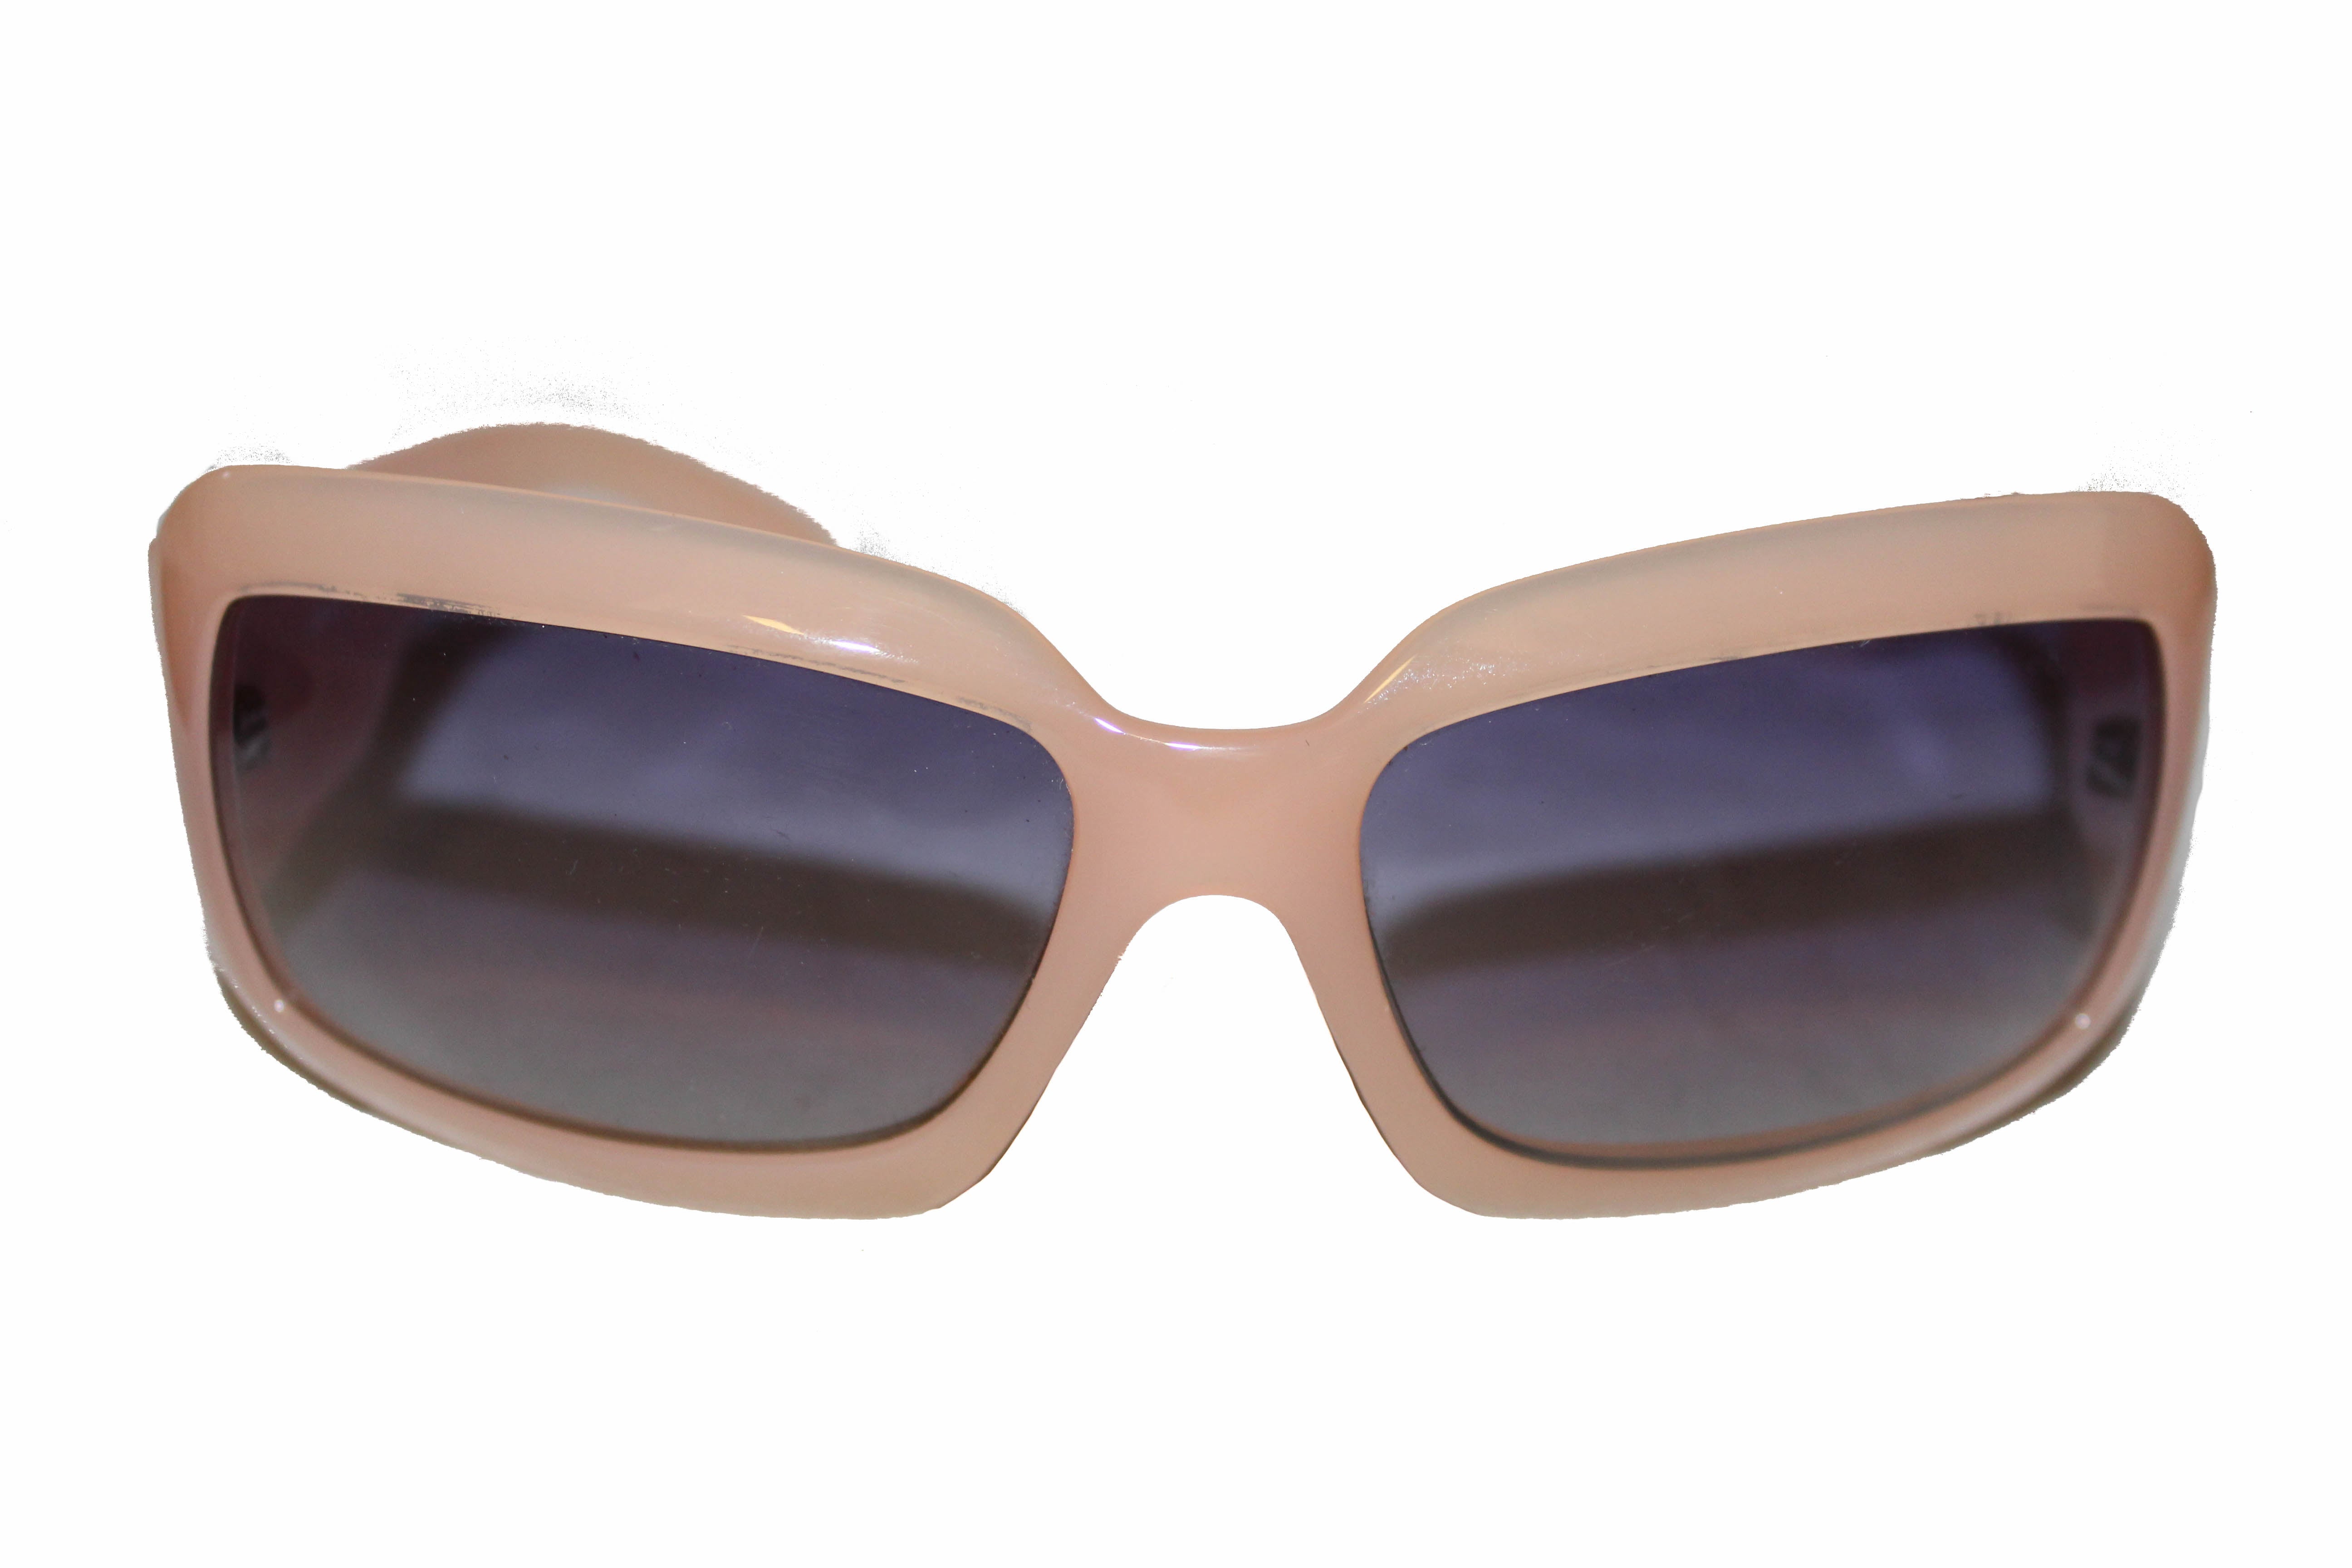 VINTAGE CHANEL MOTHER OF PEARL LOGO SUNGLASSES